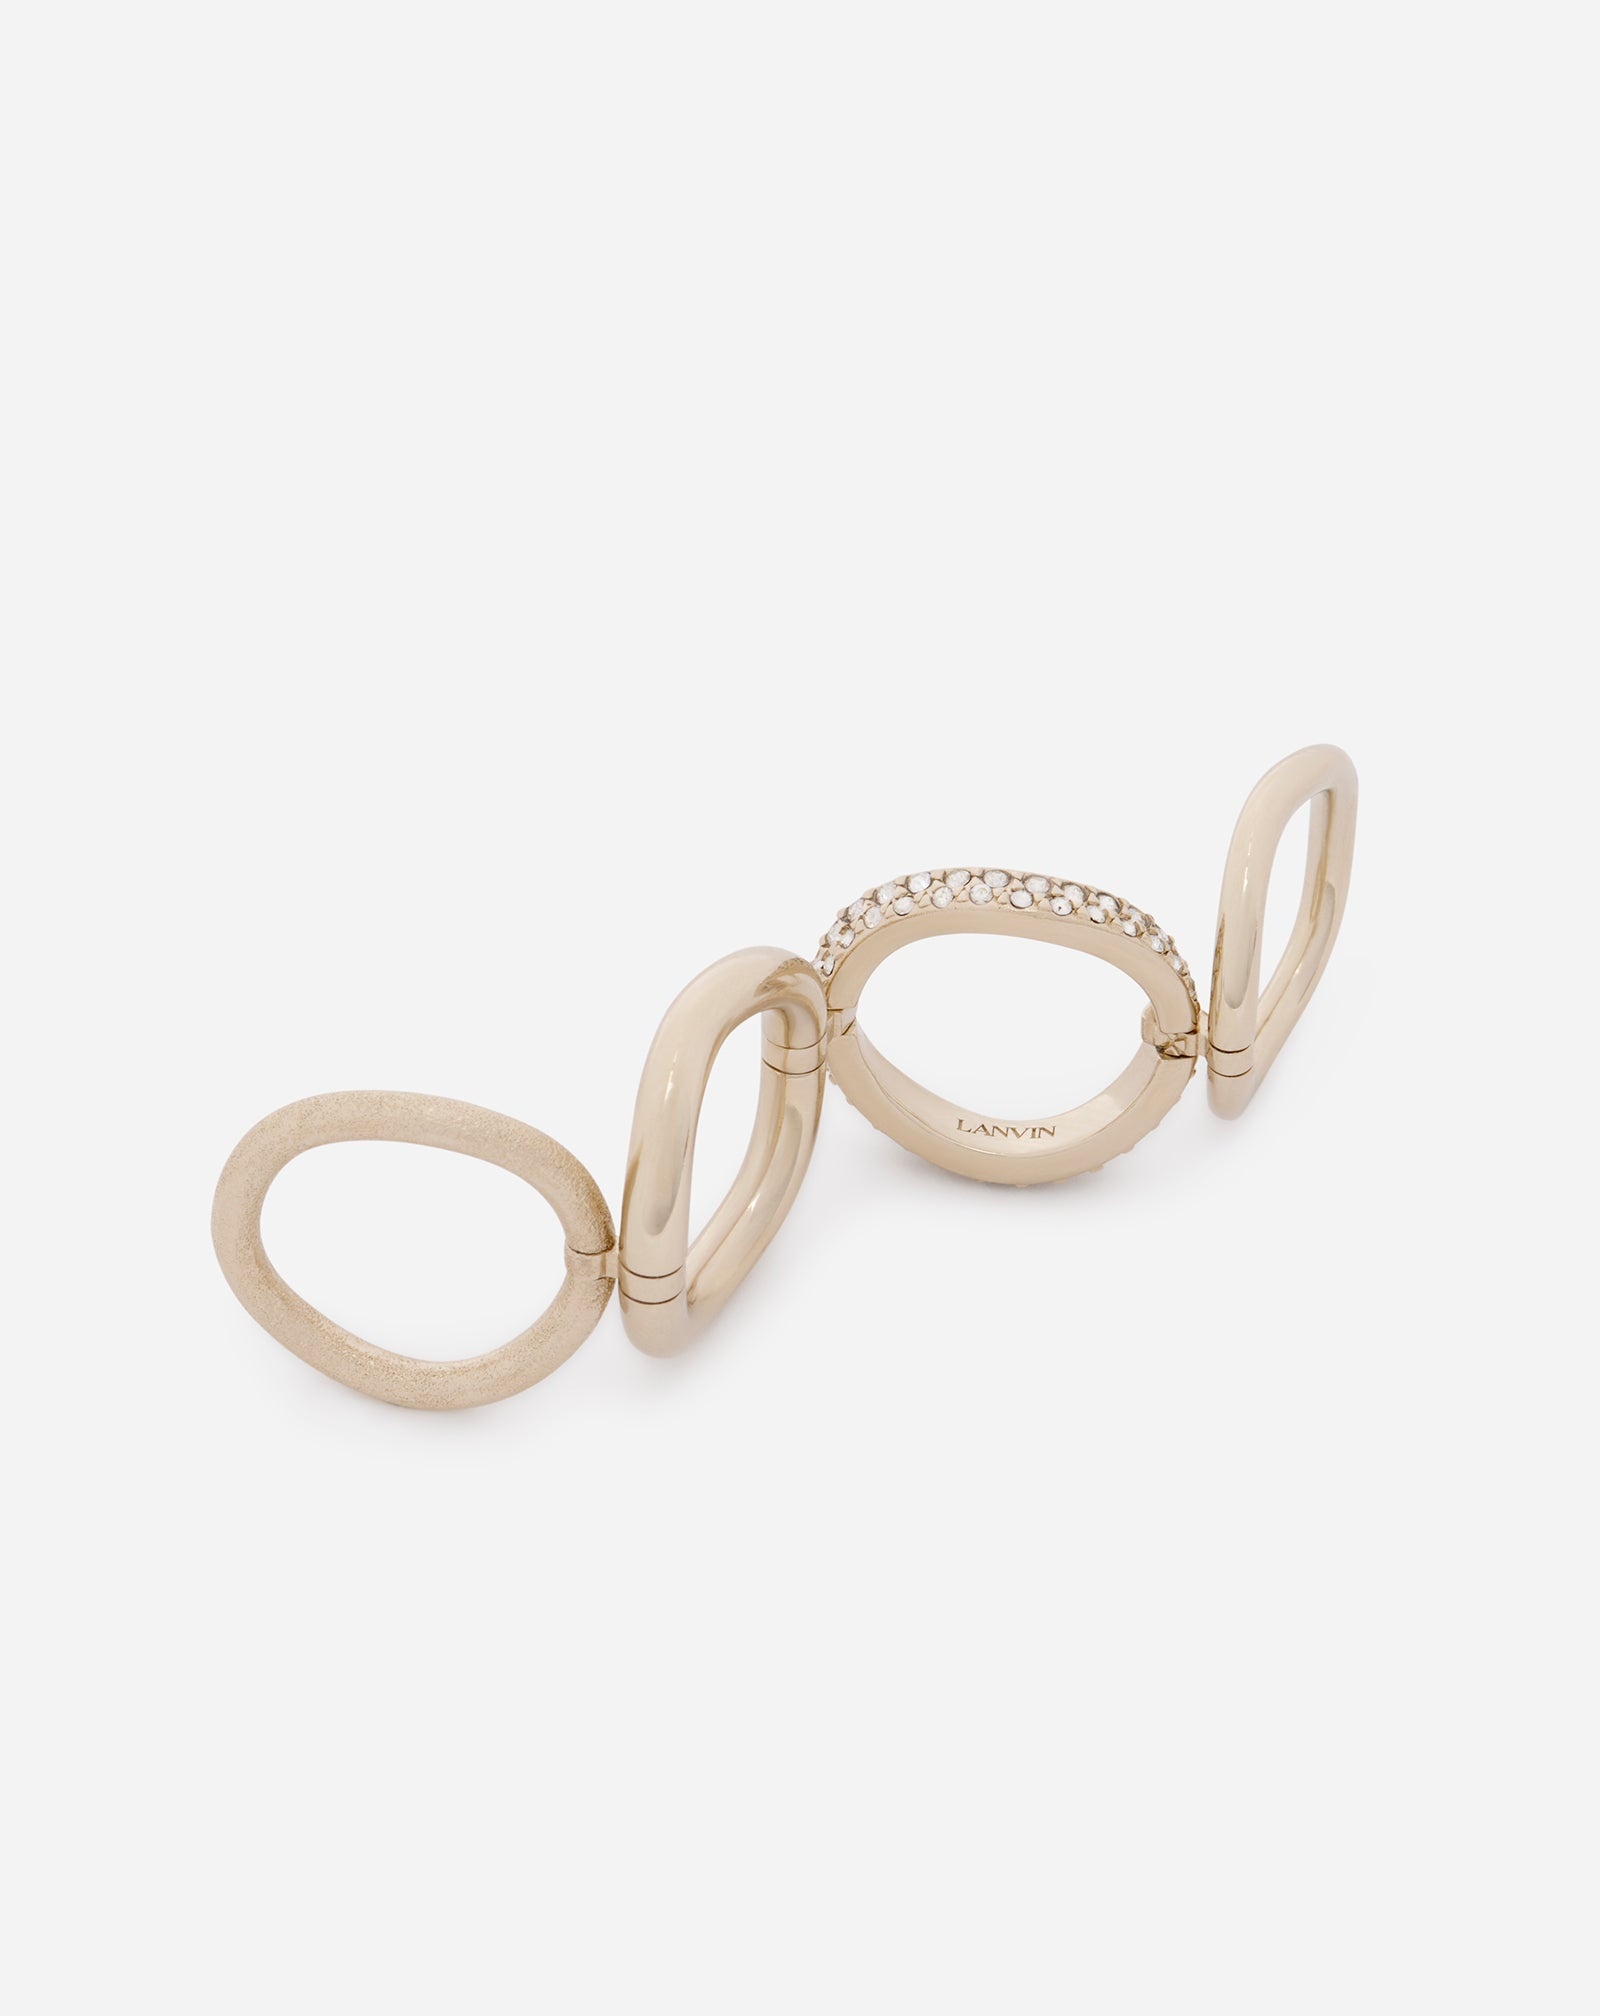 PARTITION BY LANVIN RING - 4